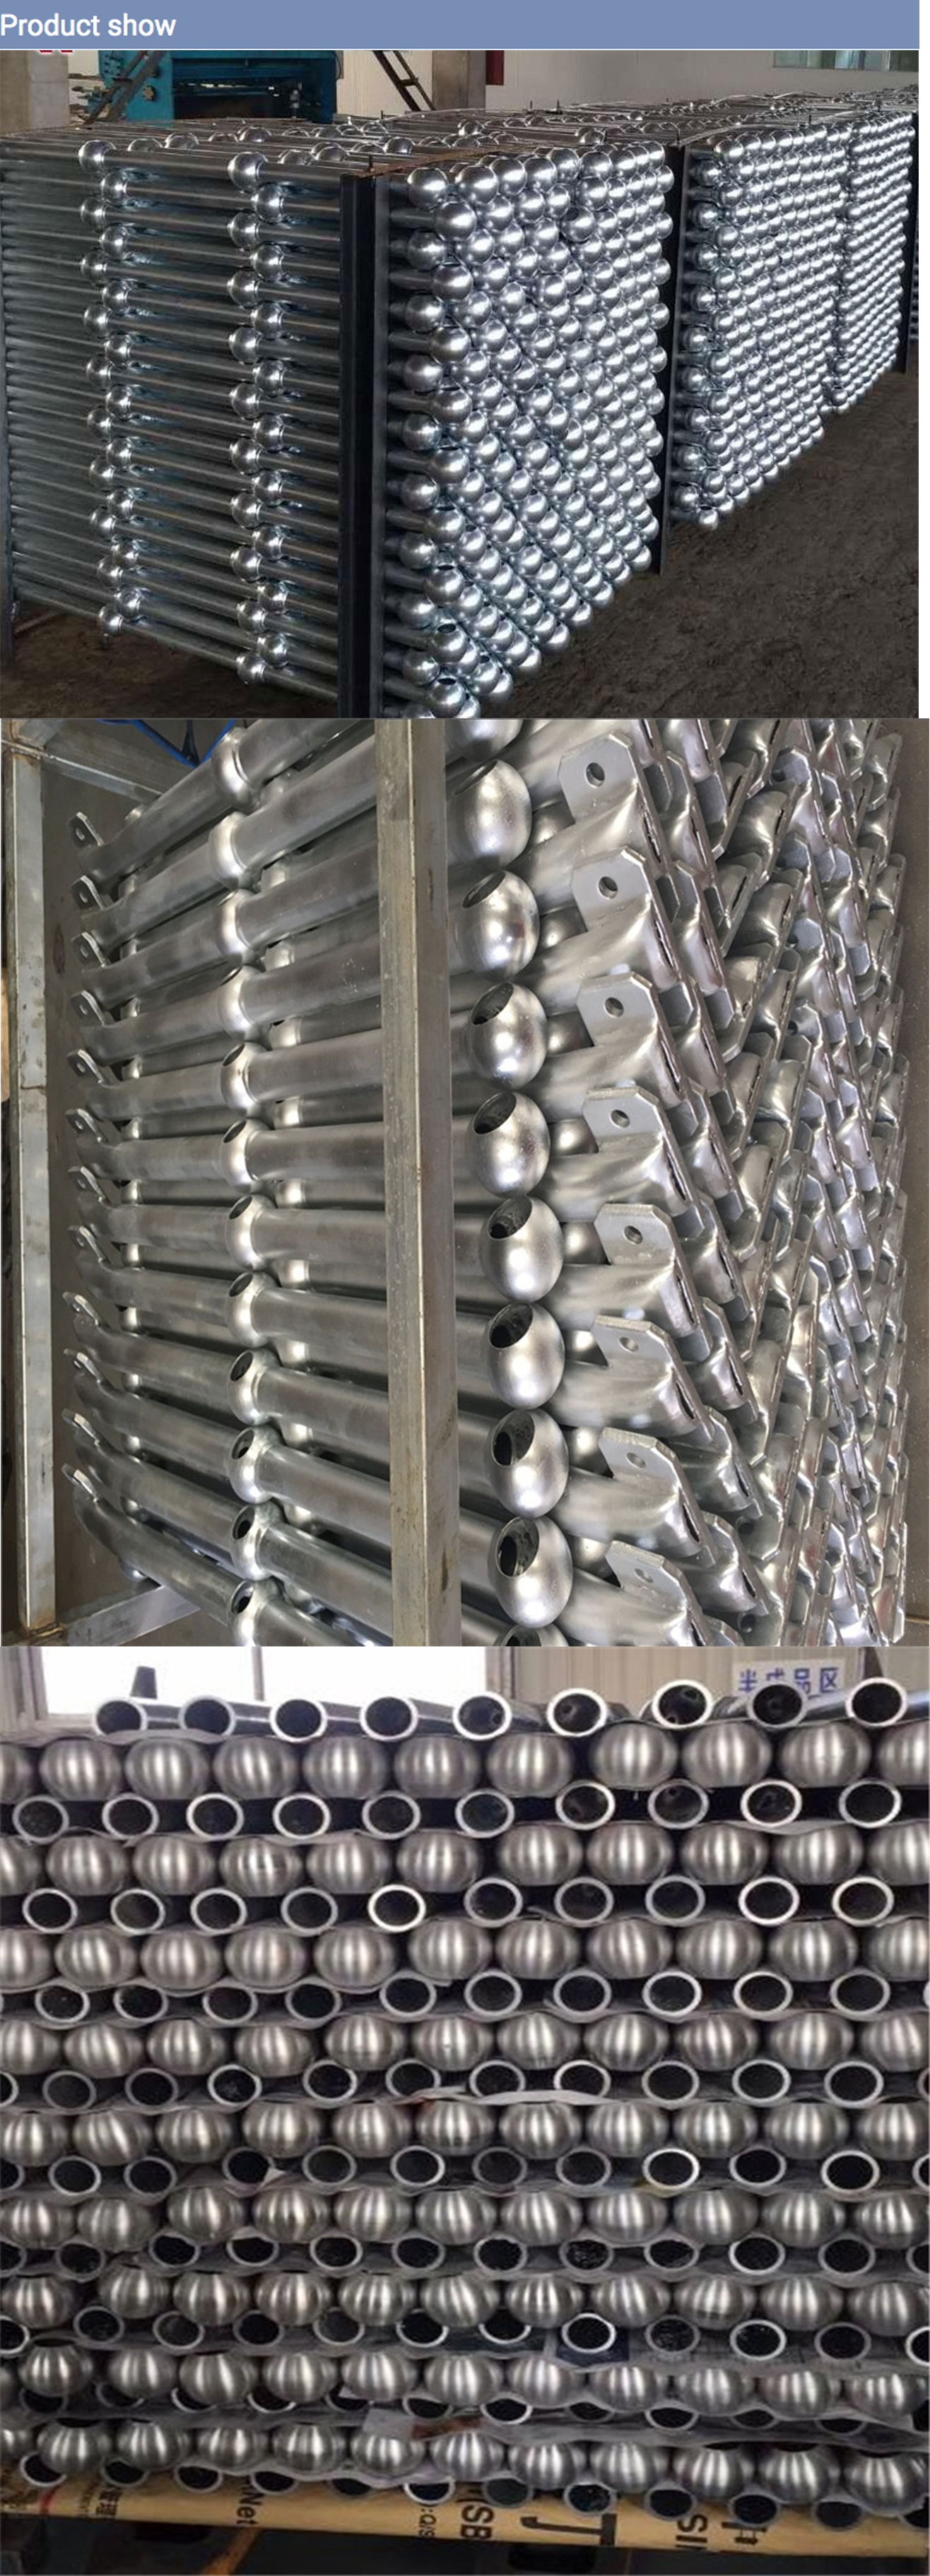 Galvanized Stanchion Railing Chemical Industry Stainless Steel Ball Joint Handrail Stanchions